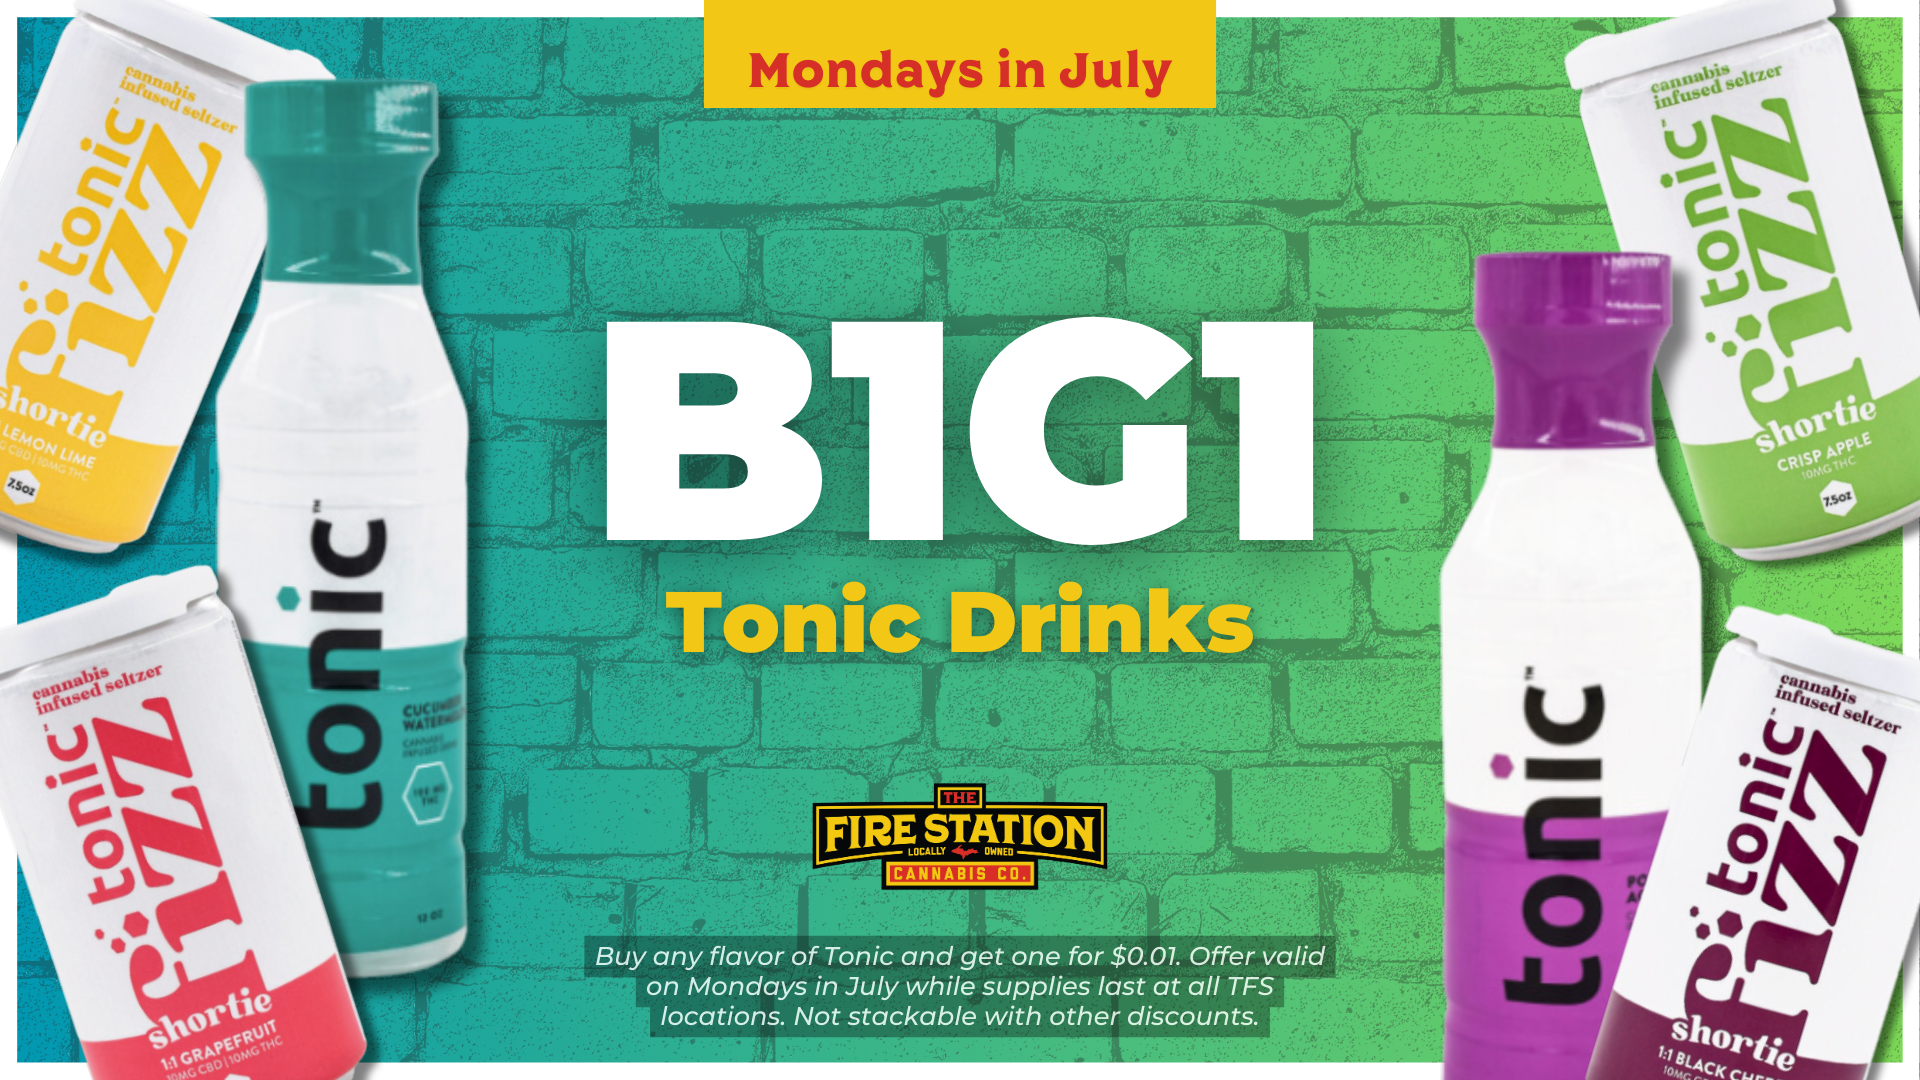 Buy any flavor of Tonic and get one for $0.01. Offer valid on Mondays in July while supplies last at all TFS locations. Not stackable with other discounts.